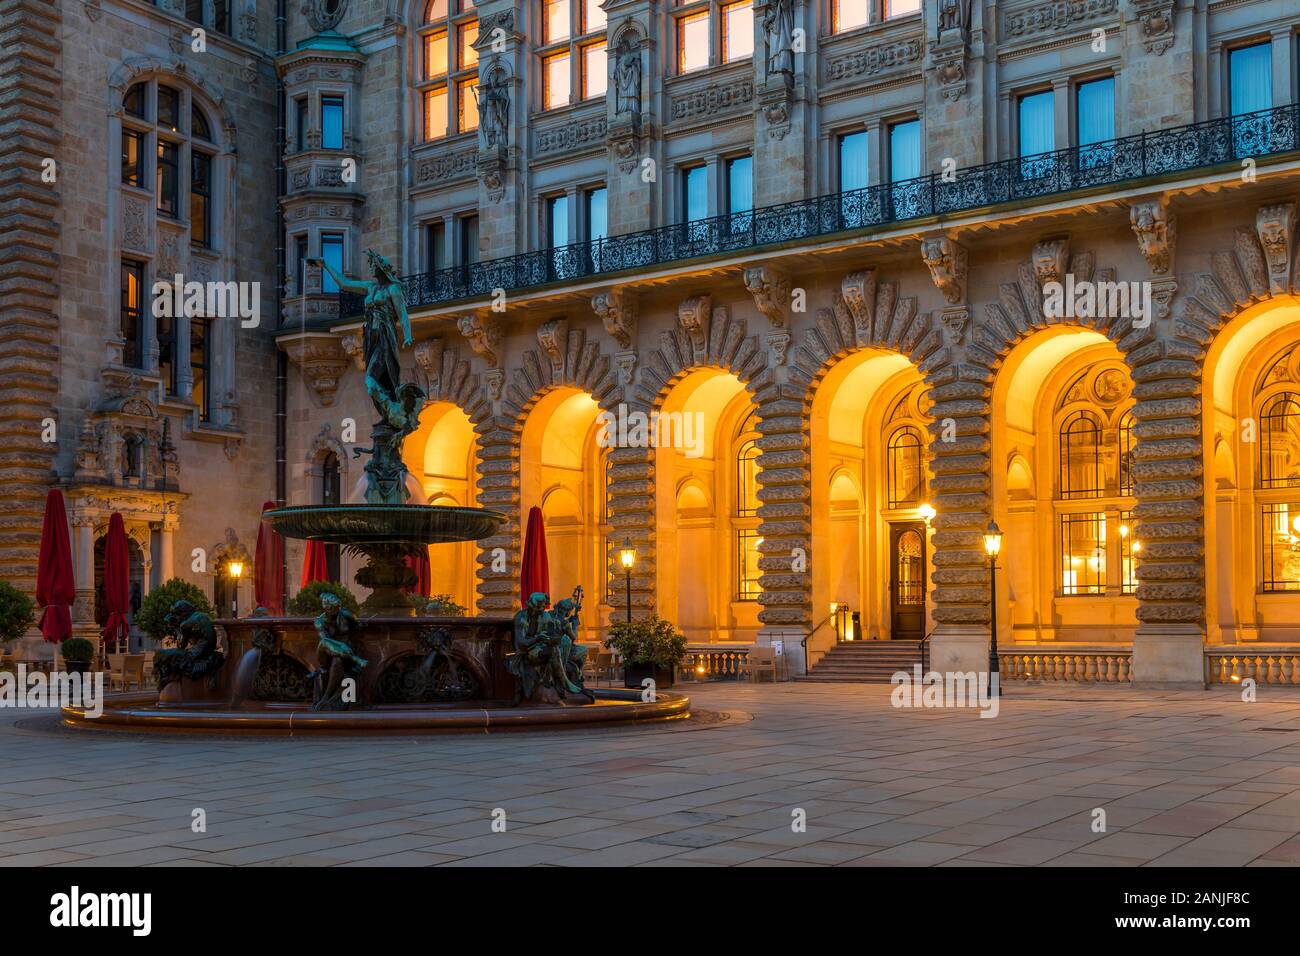 Fountain in the inner courtyard of the town hall at dusk, Hamburg, Germany, Europe Stock Photo